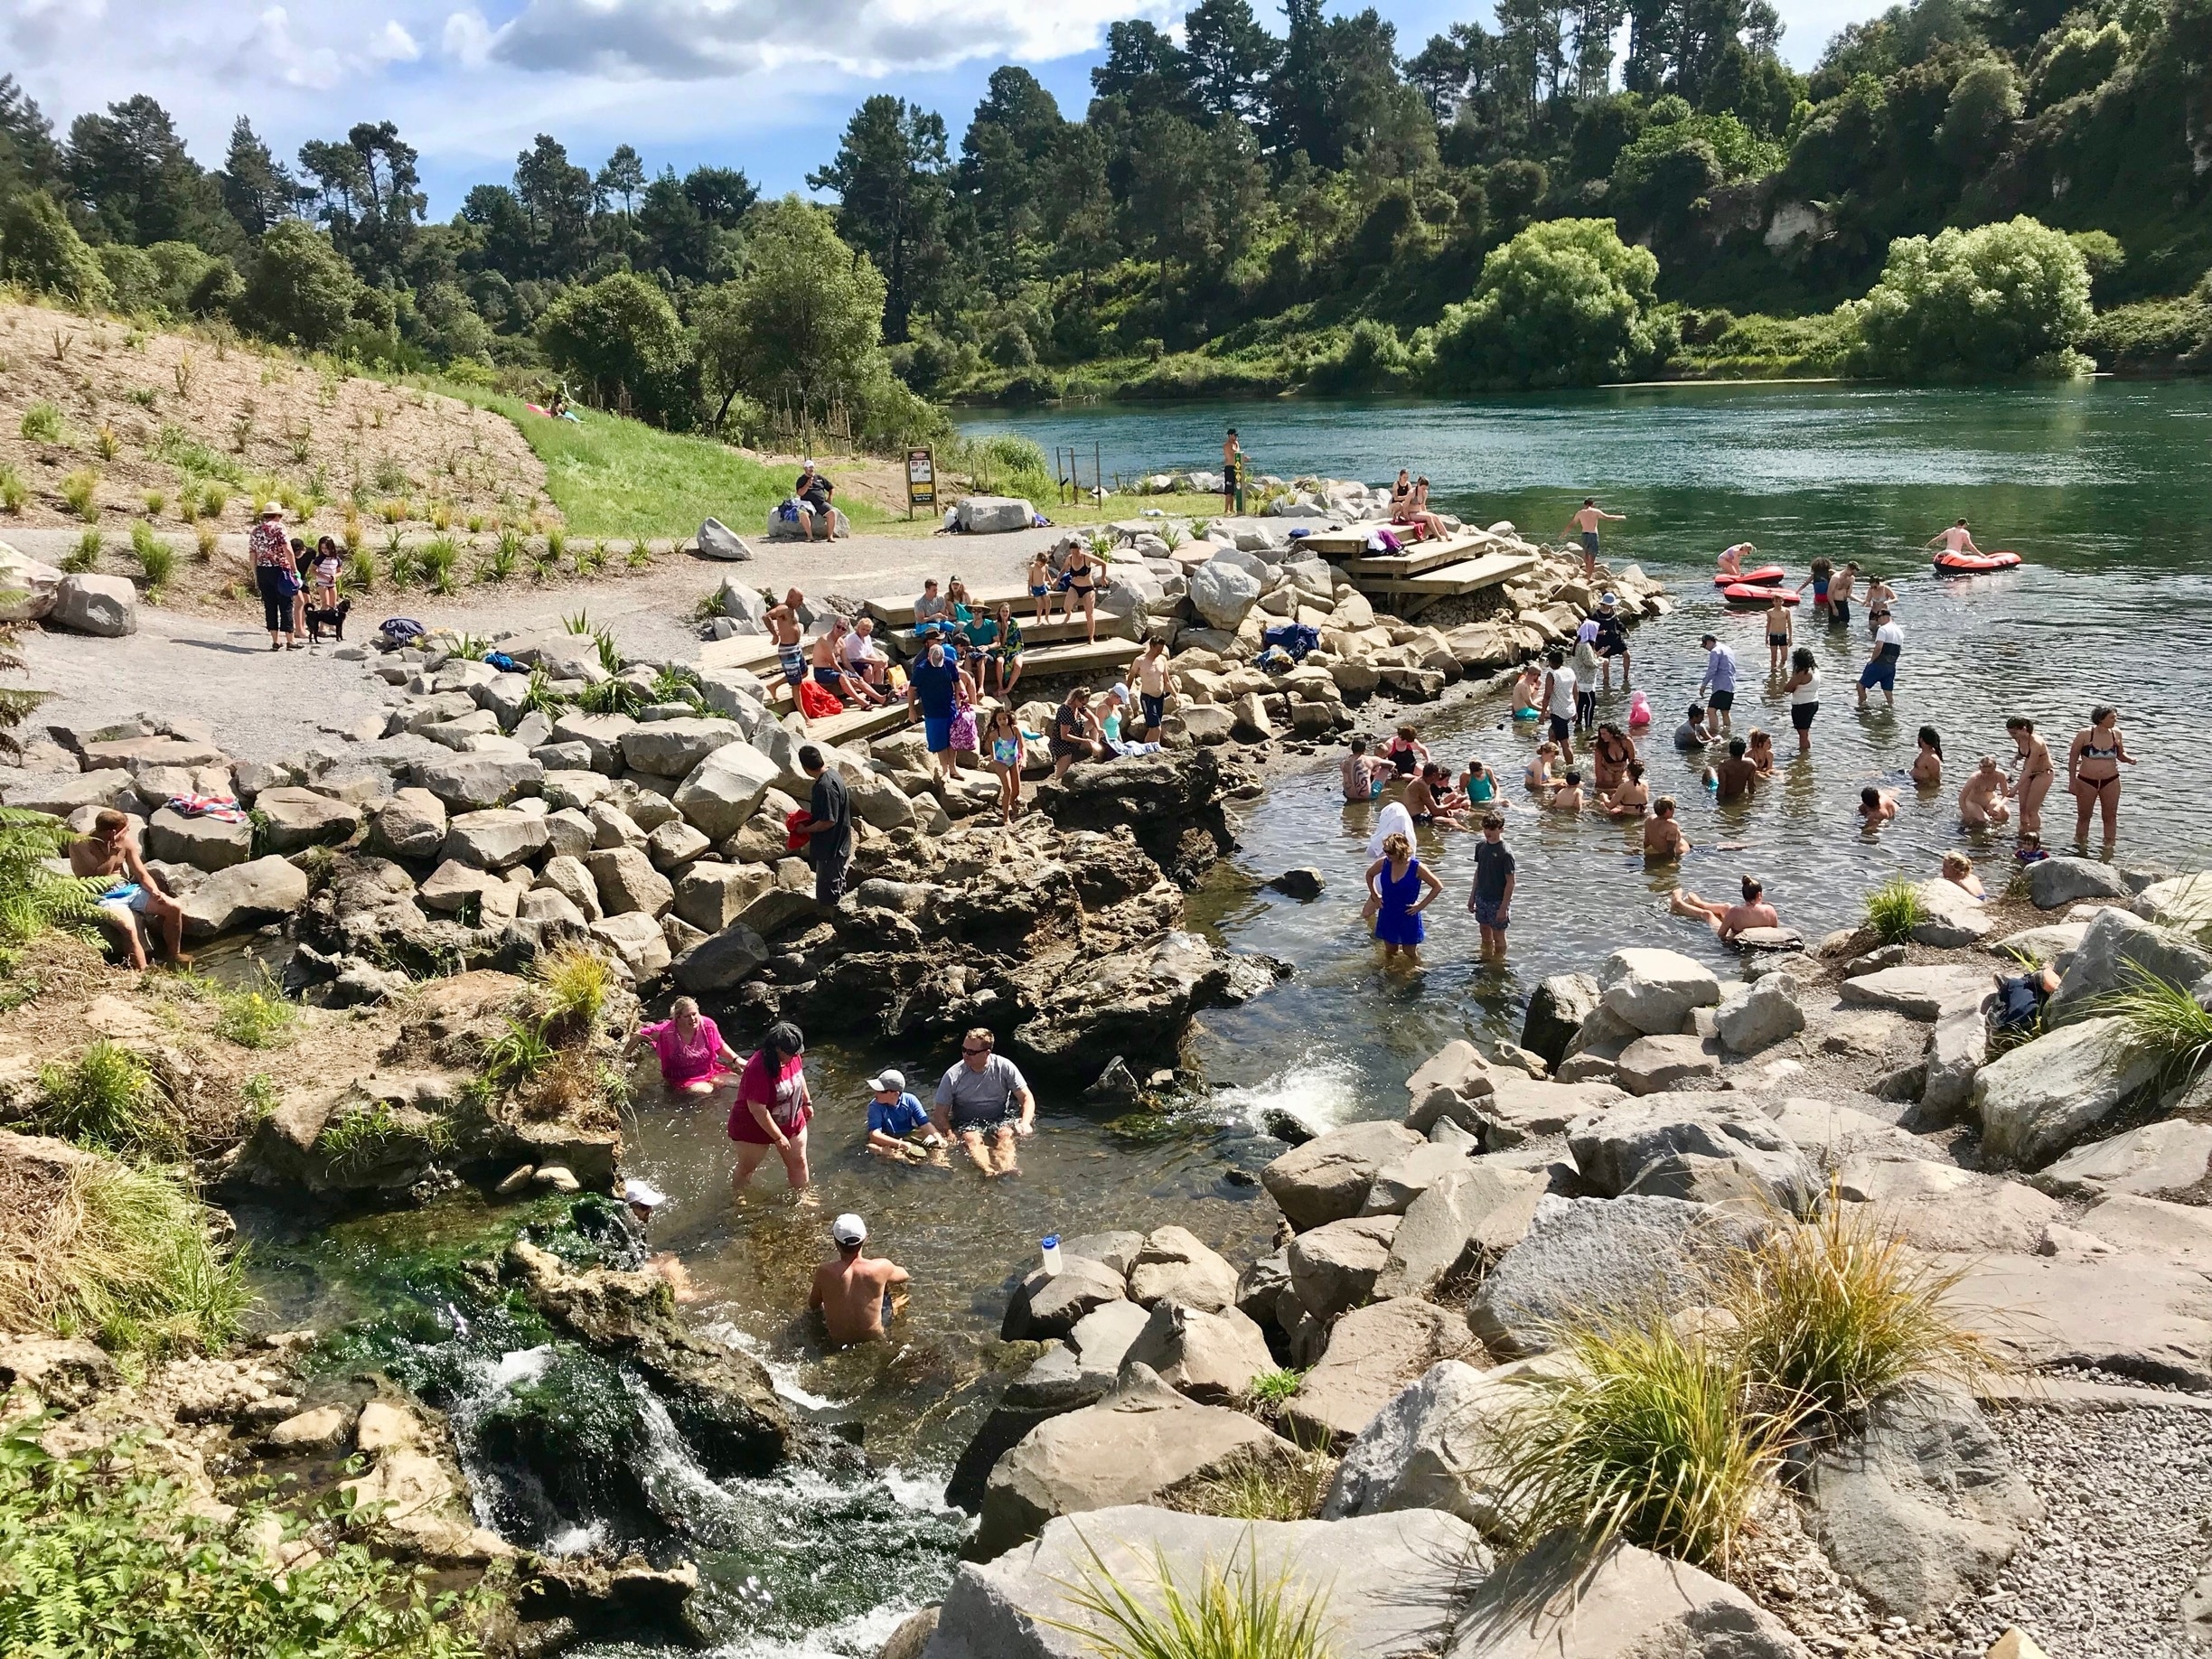 People gather at a hot spot in the Waikato river.  Because of the geothermal activity in this area, this area of the lake is like a hot tub. #waikatoriver #geothermal #nature #newzealand #taupo #hotspot